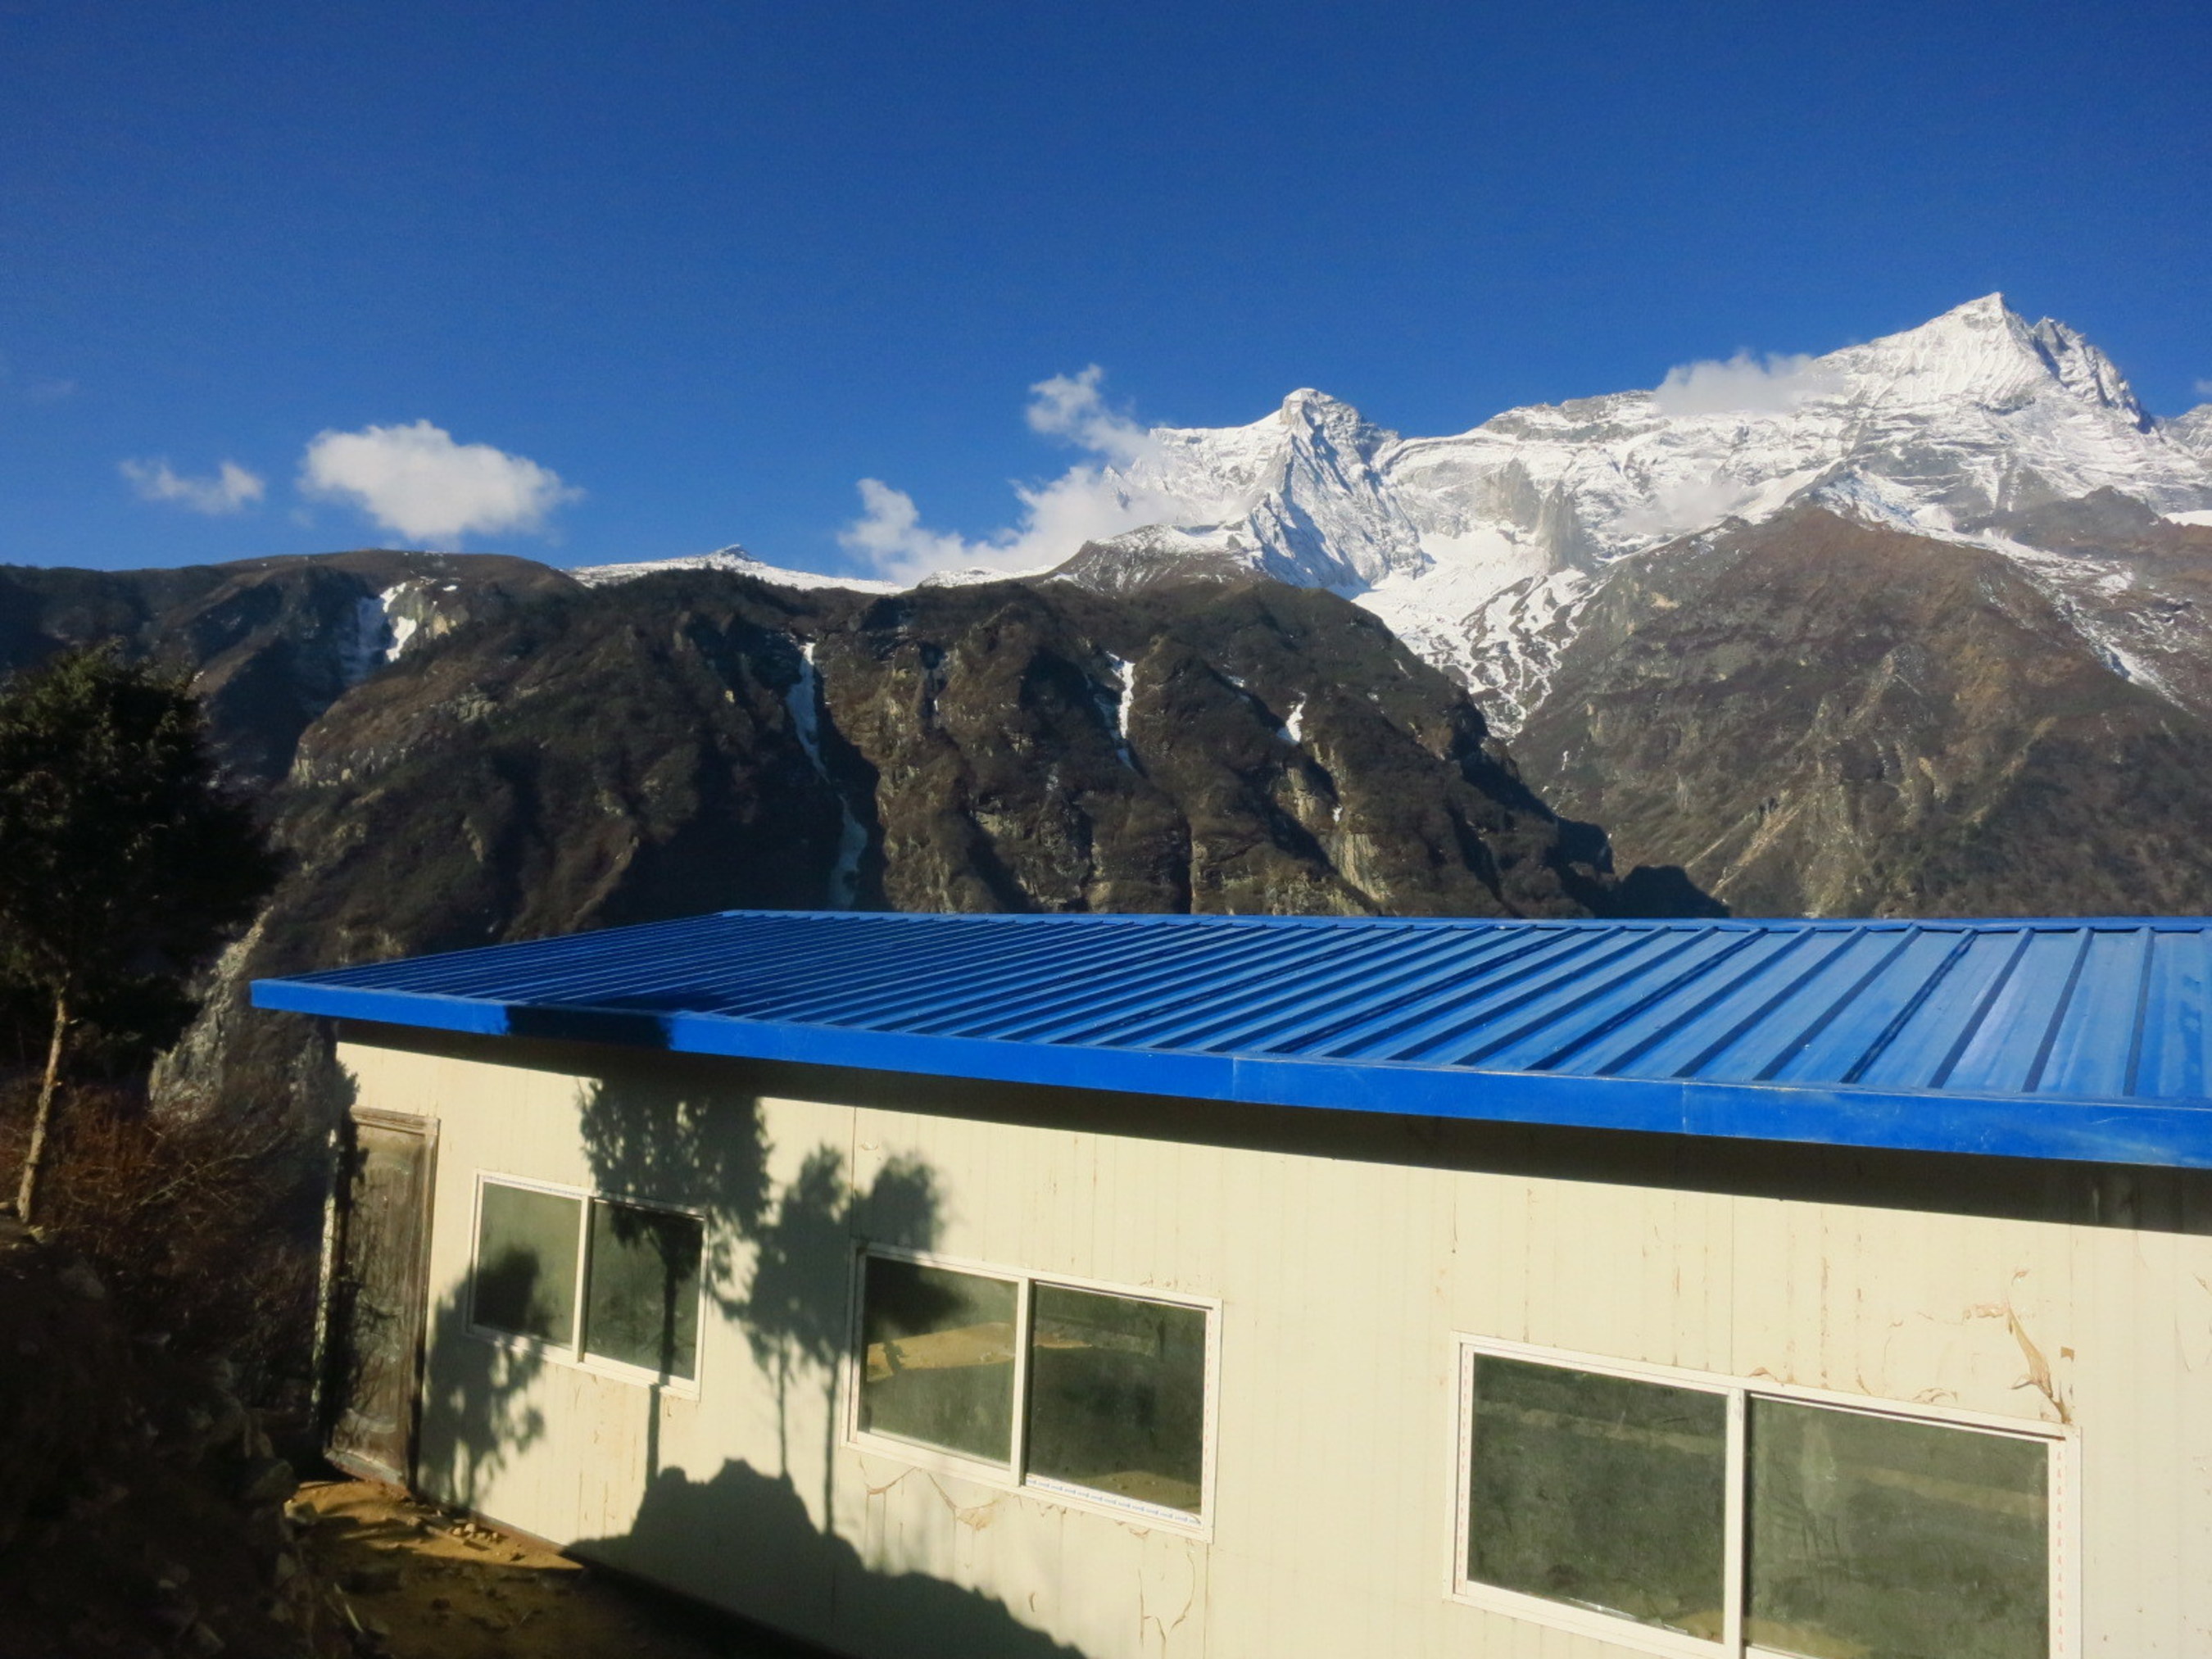 Namche Bazaar relief center in Nepal's Everest region. The new center will be stocked with essential supplies that can be accessed by the community in the event of a natural disaster. REI Adventures worked closely with its in-country guide team, Sagarmatha Buffer Zone Authority and Sagarmatha Pollution Control Committee.